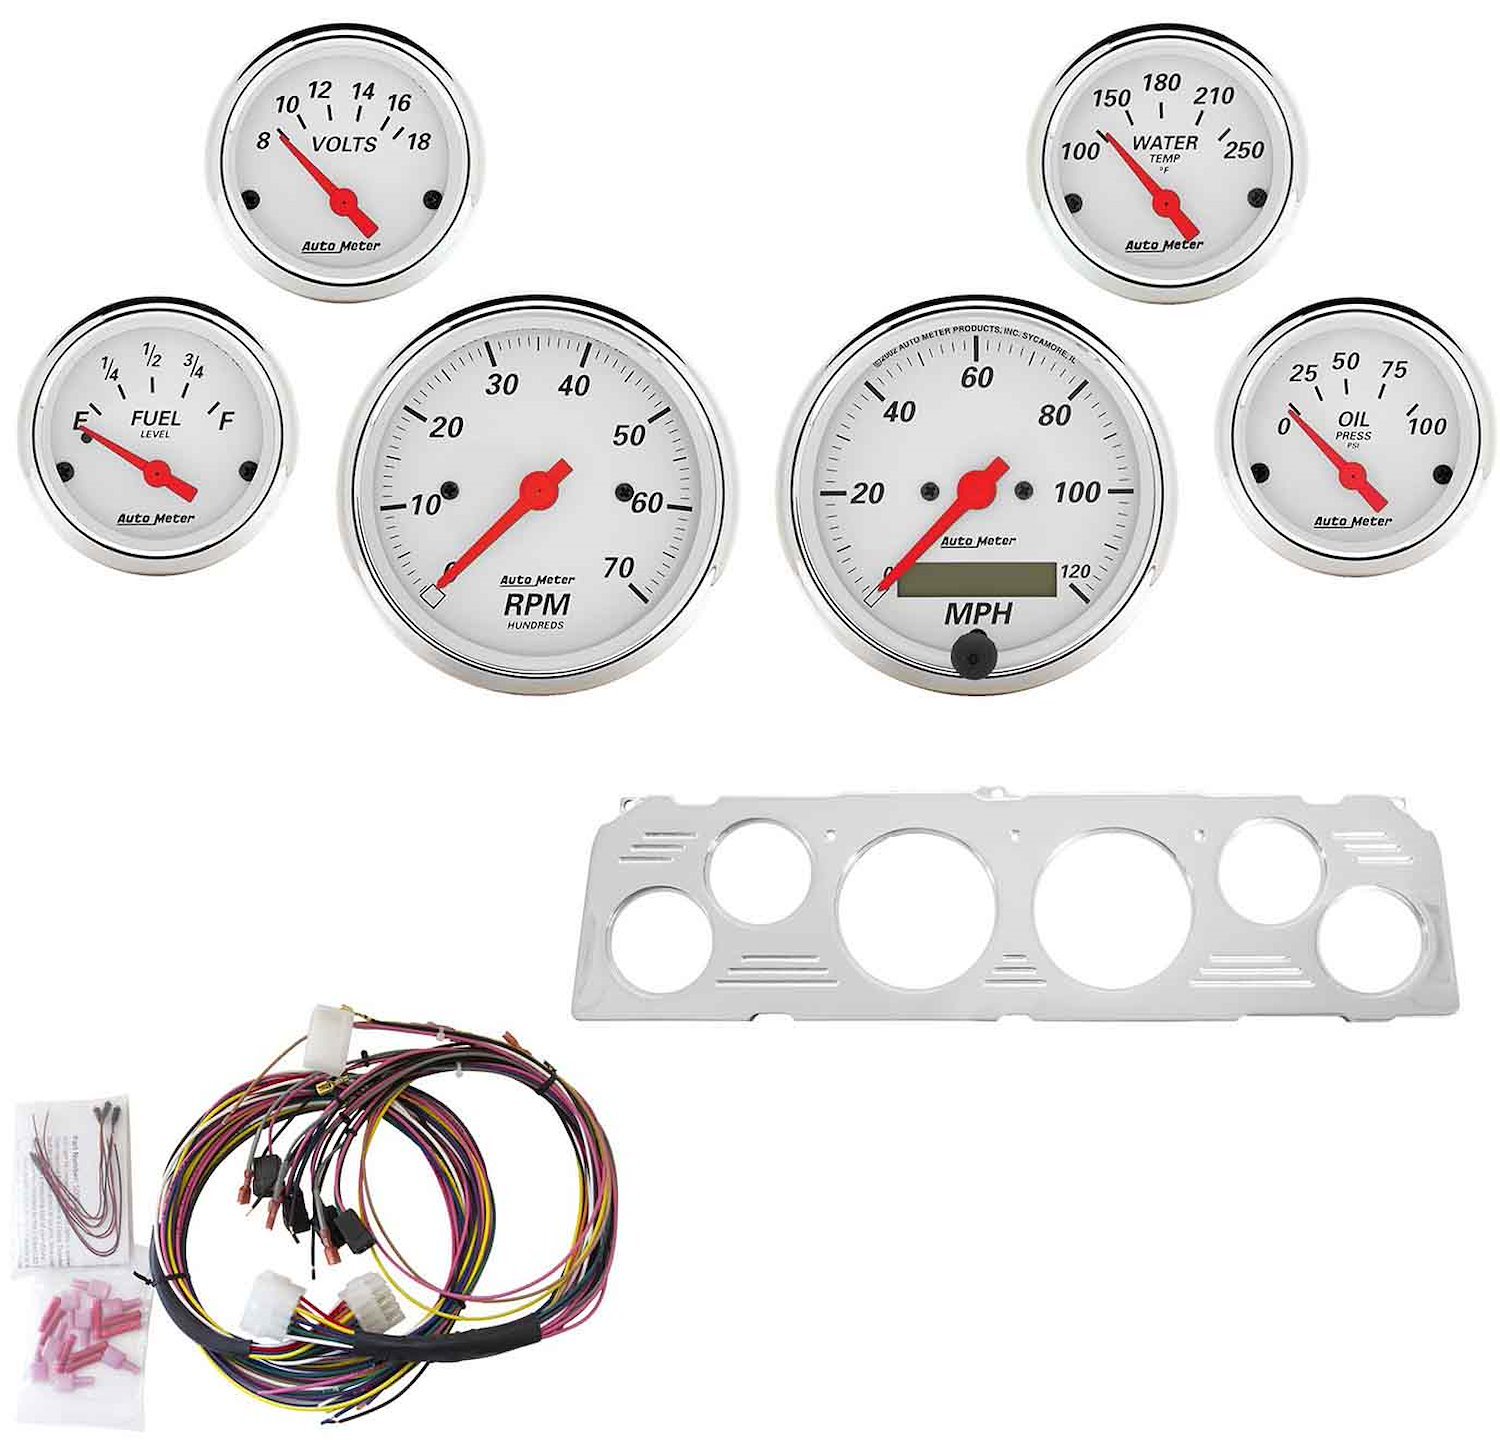 6-Gauge Direct-Fit Dash Kit 1964-1966 Chevy Truck - Arctic White Series - Polished Panel